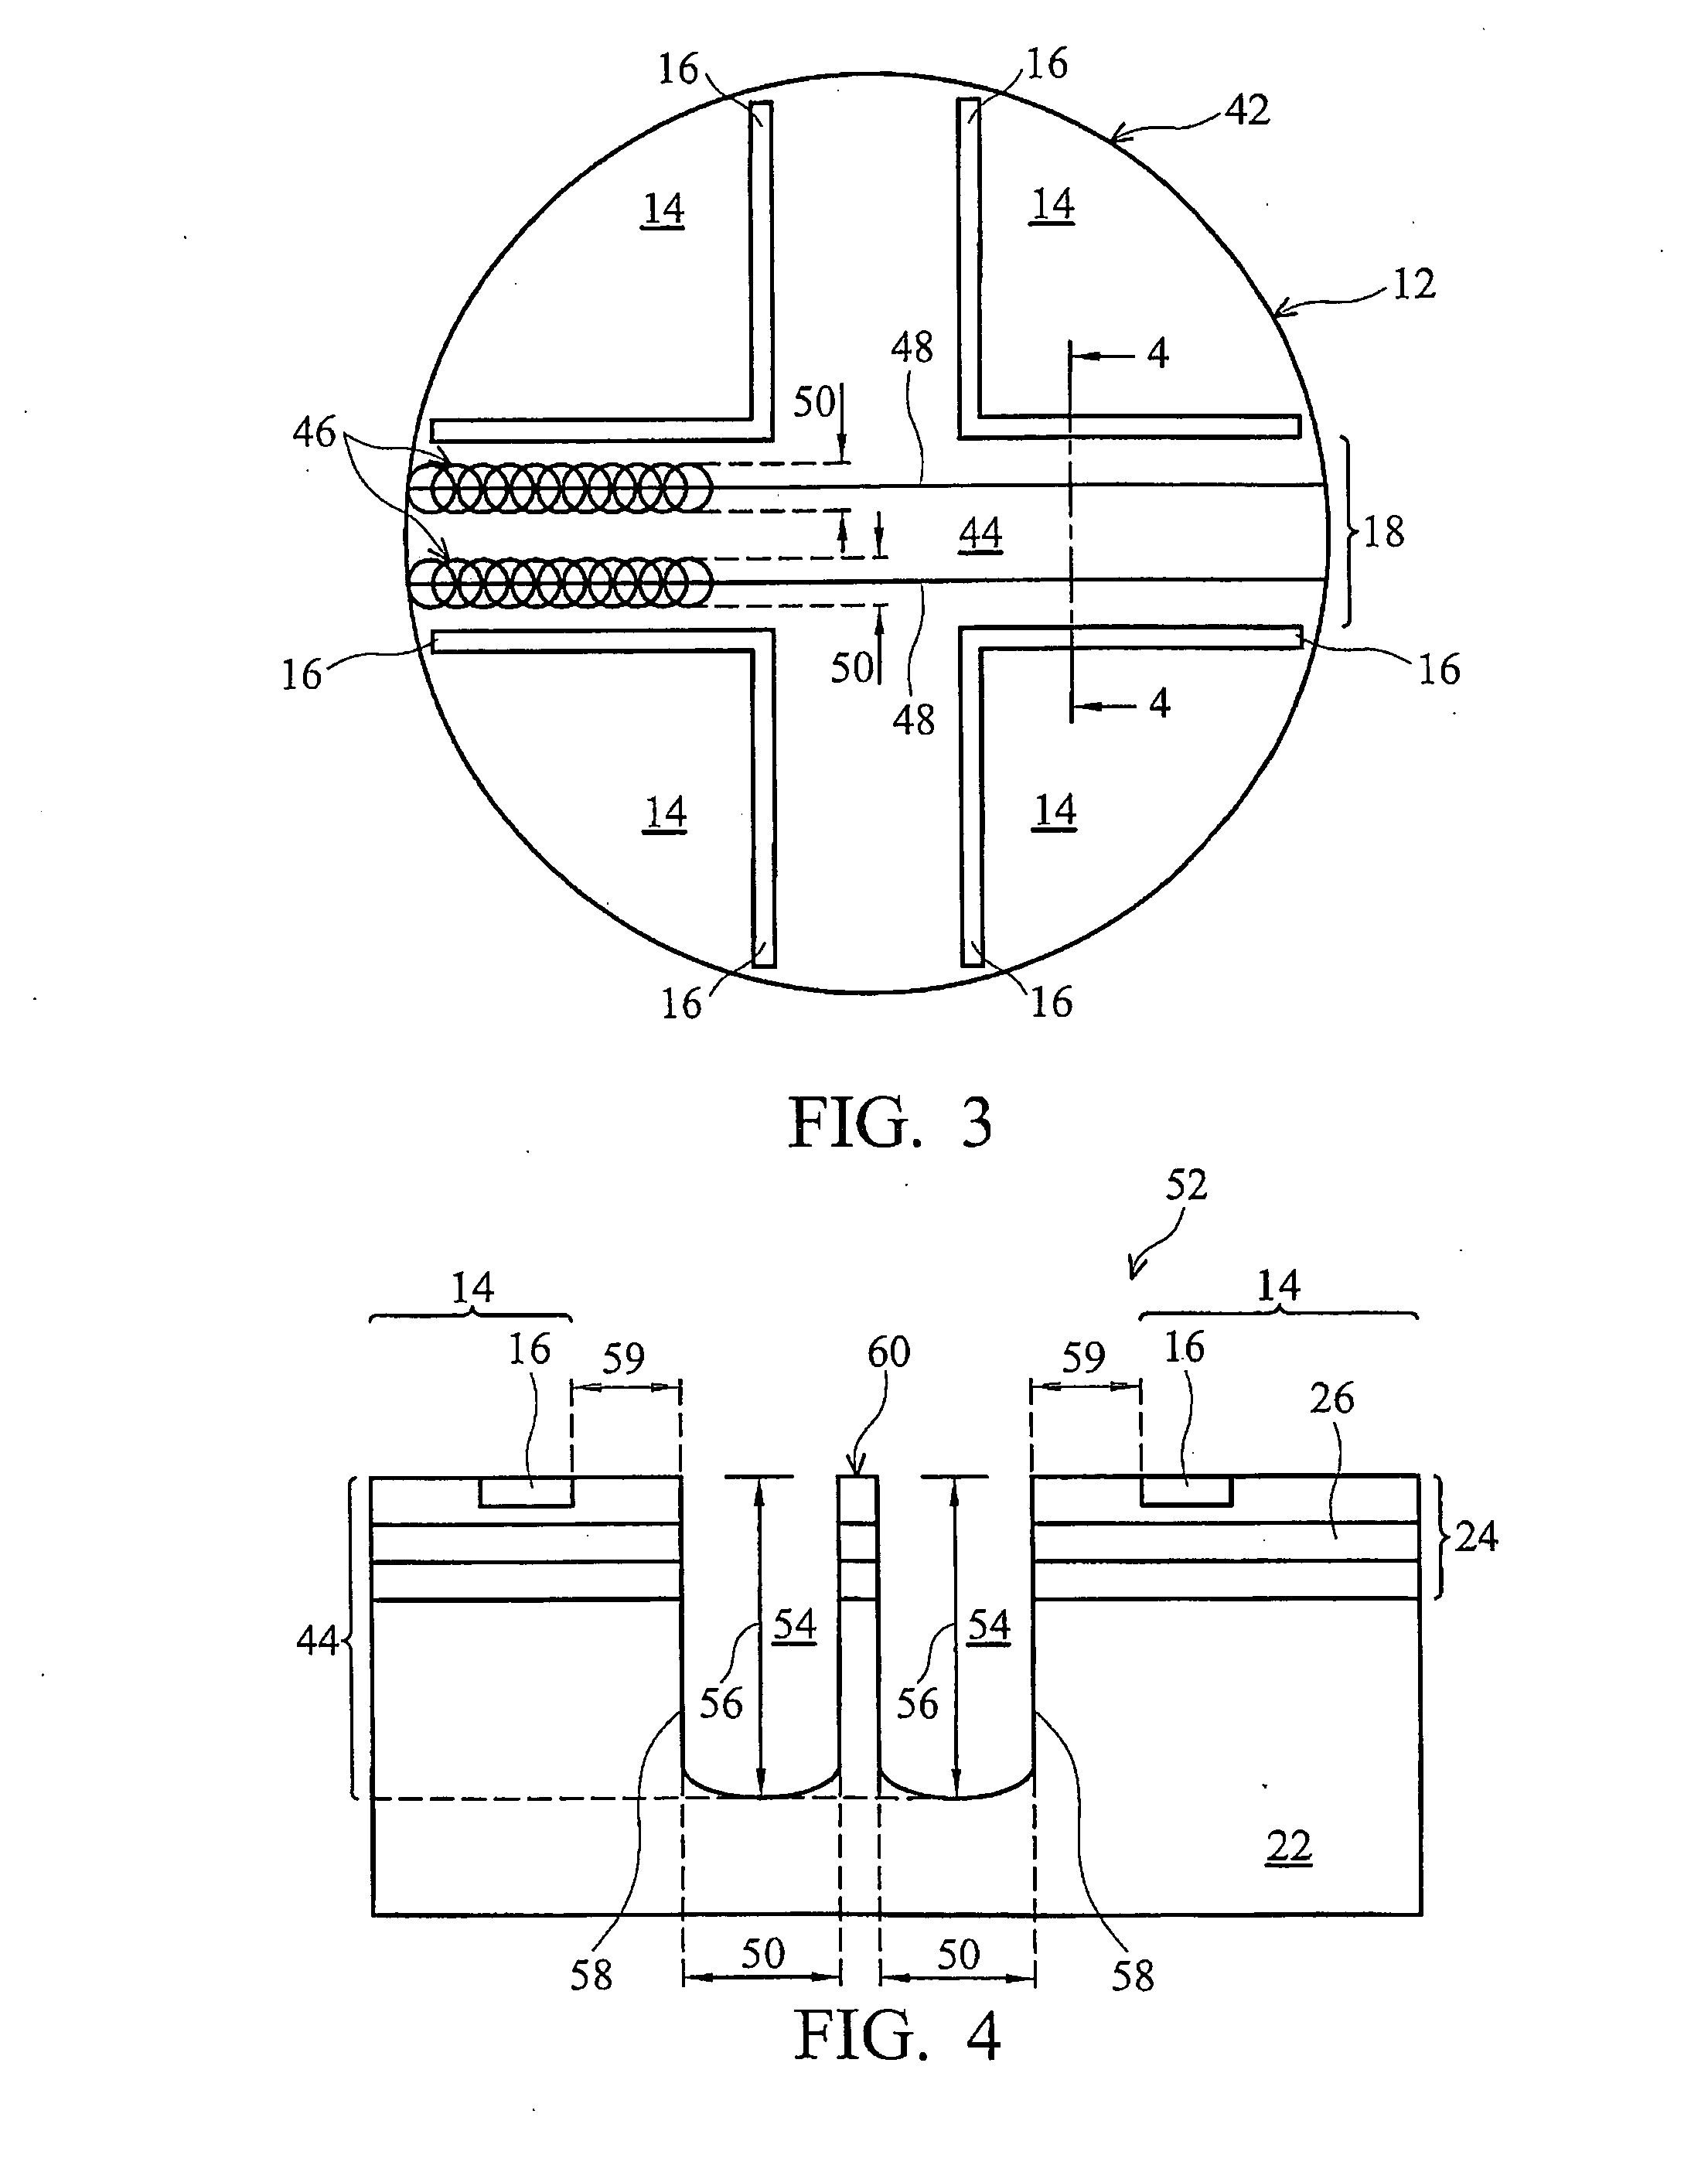 Method of cutting integrated circuit chips from wafer by ablating with laser and cutting with saw blade